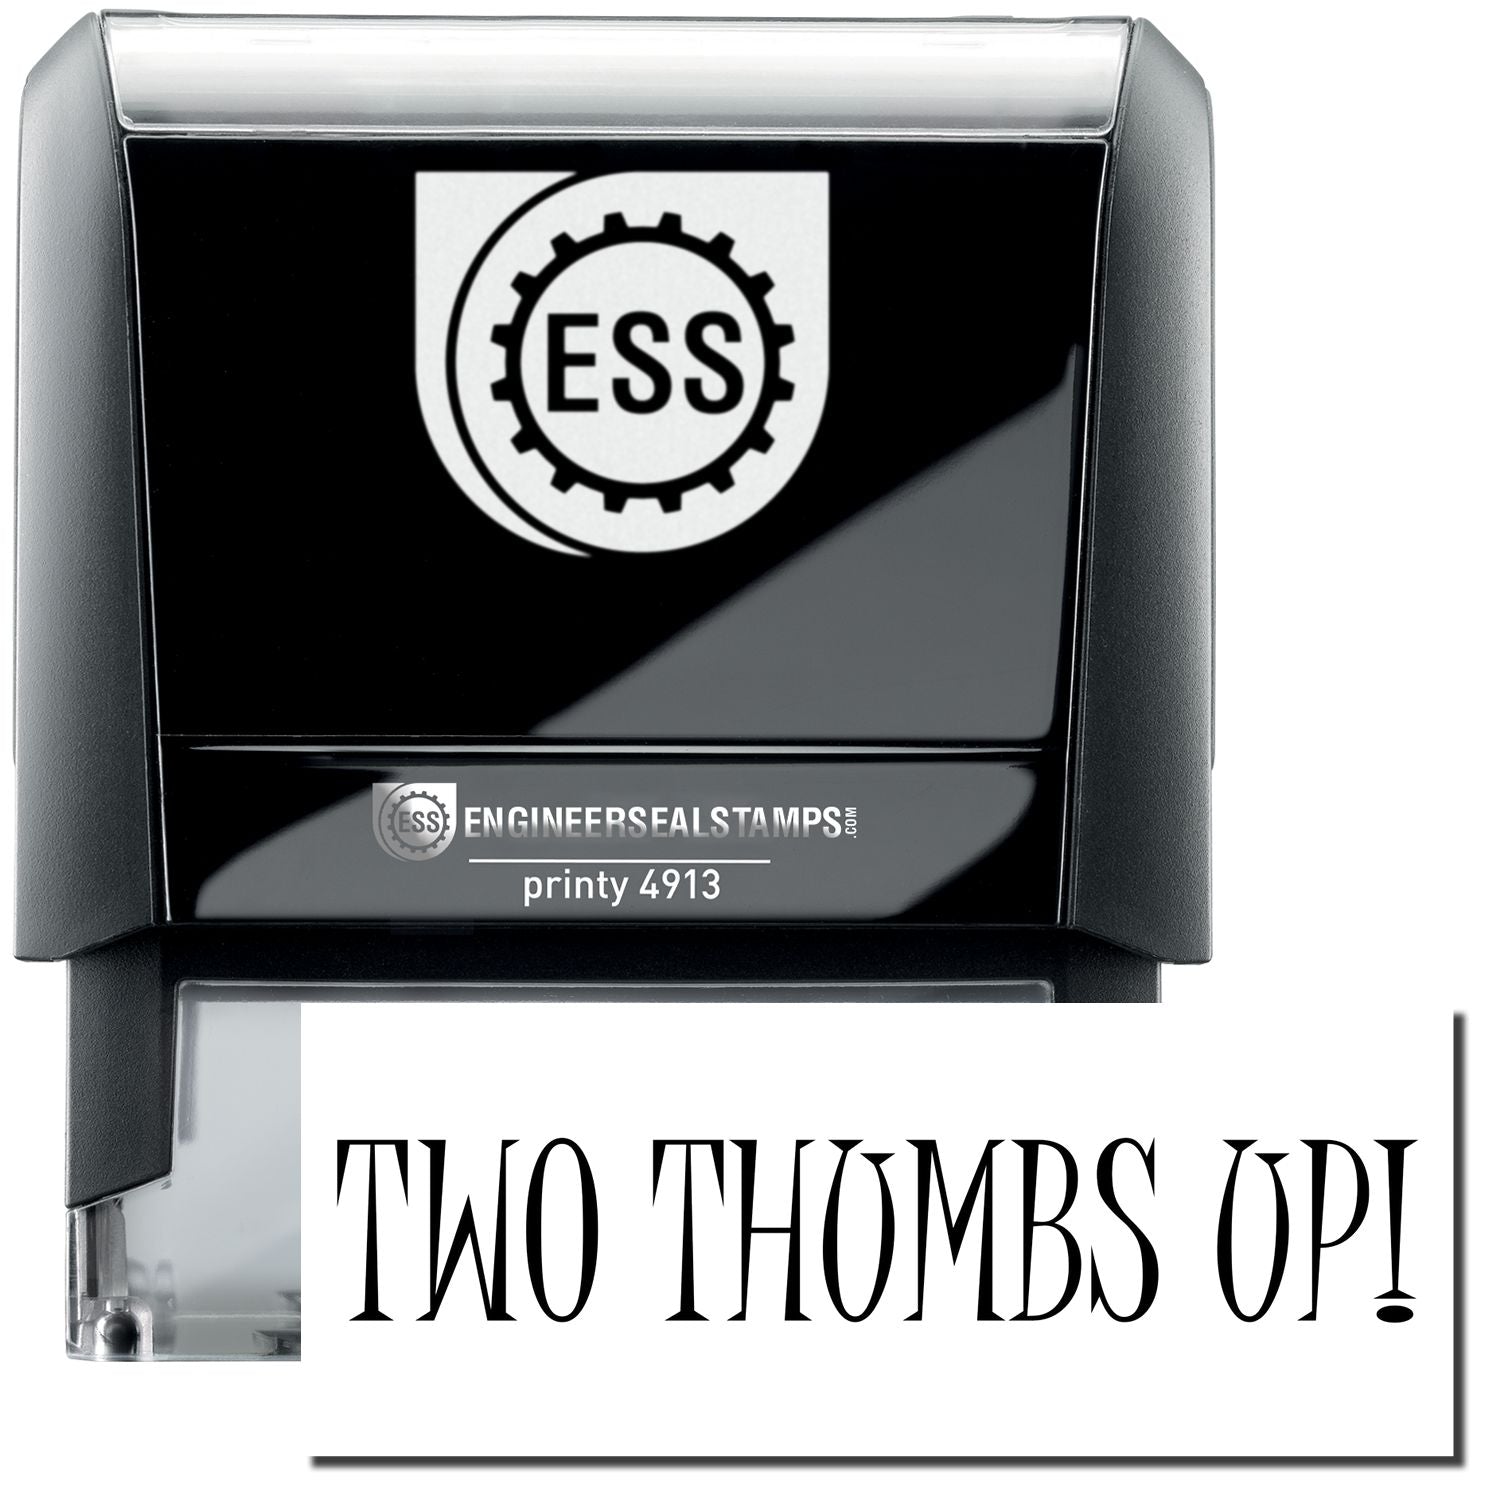 A self-inking stamp with a stamped image showing how the text "TWO THUMBS UP!" in a unique large font is displayed by it.